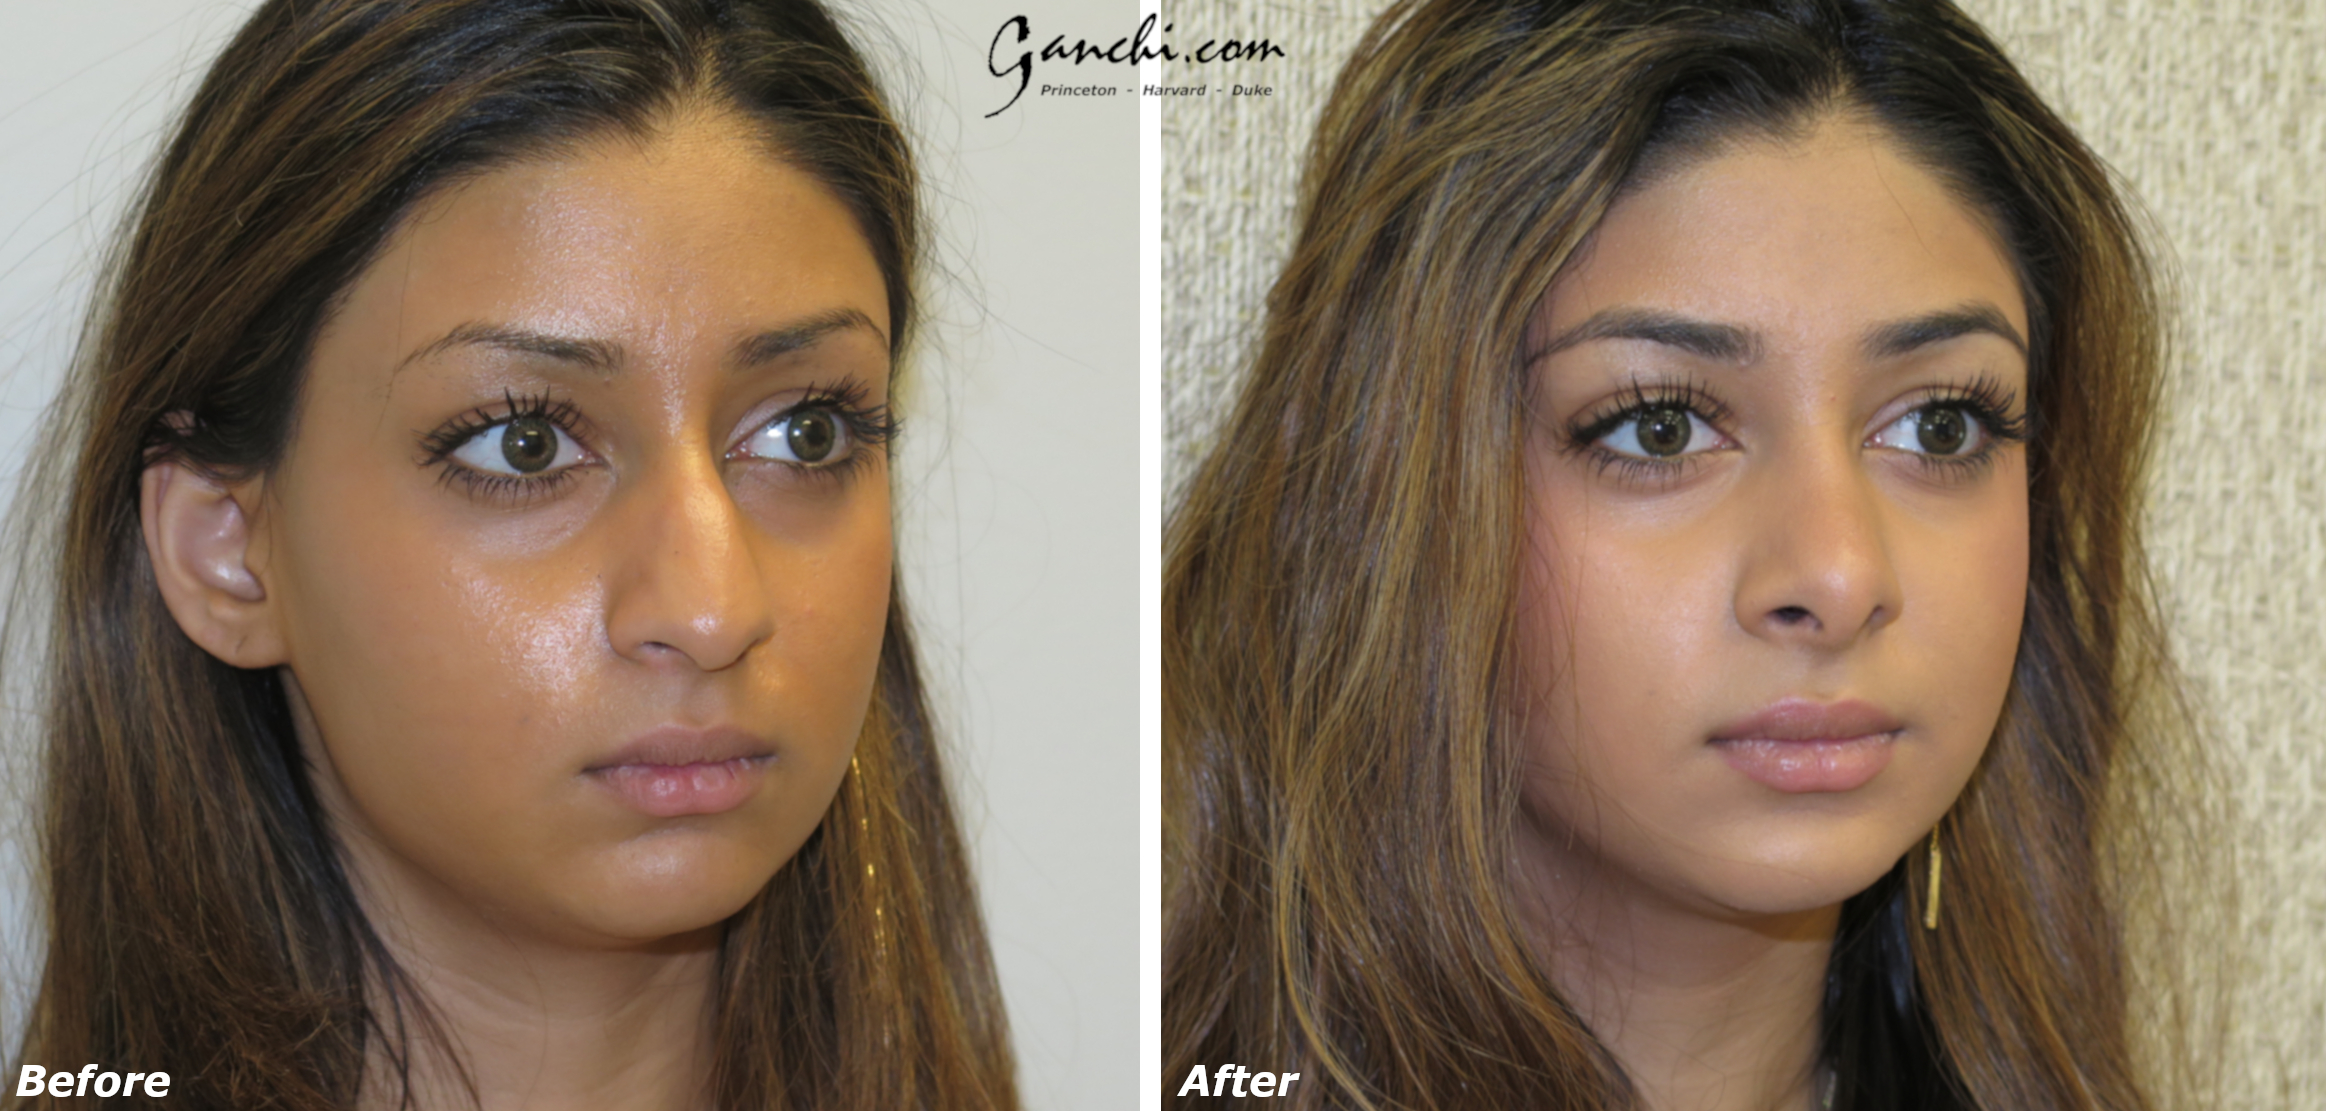 Rhinoplasty Before and After Results